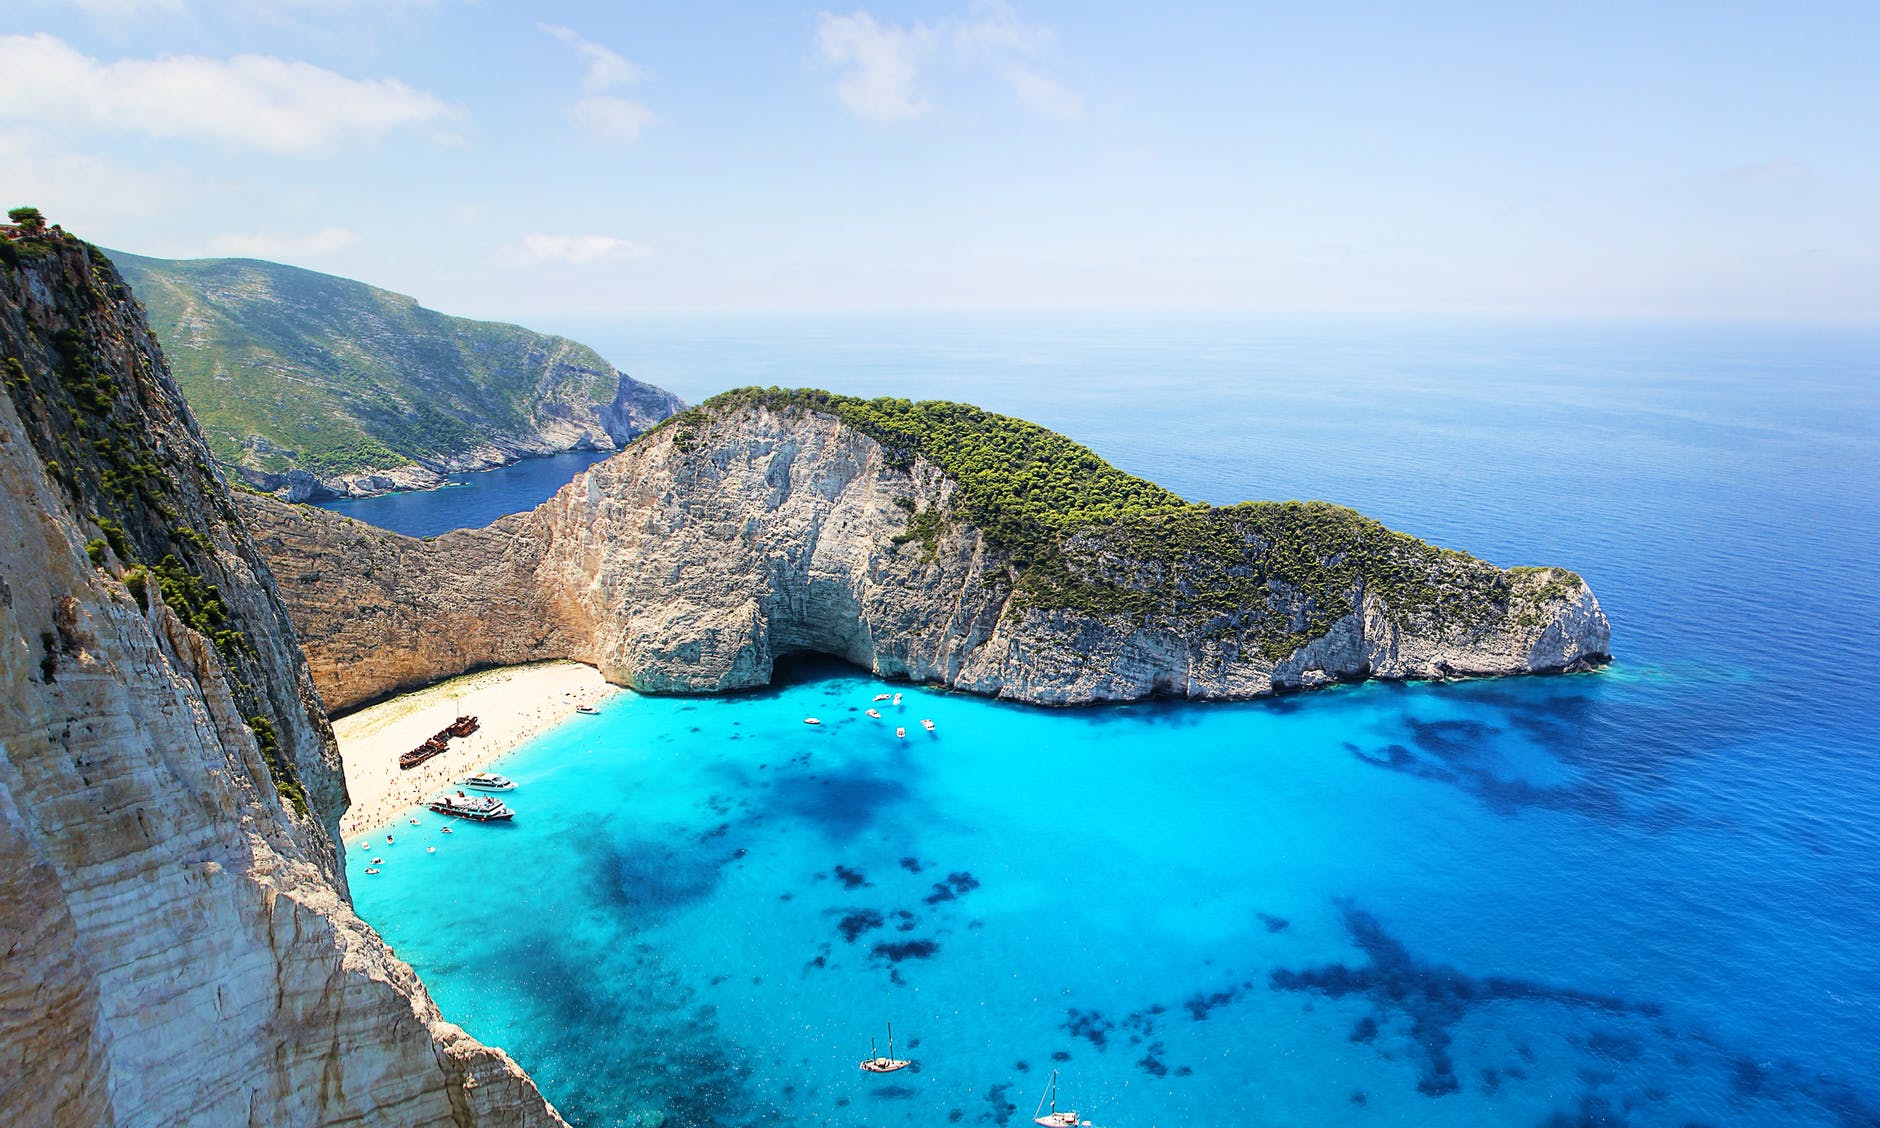 Zakynthos: The best beaches of the island that you must visit